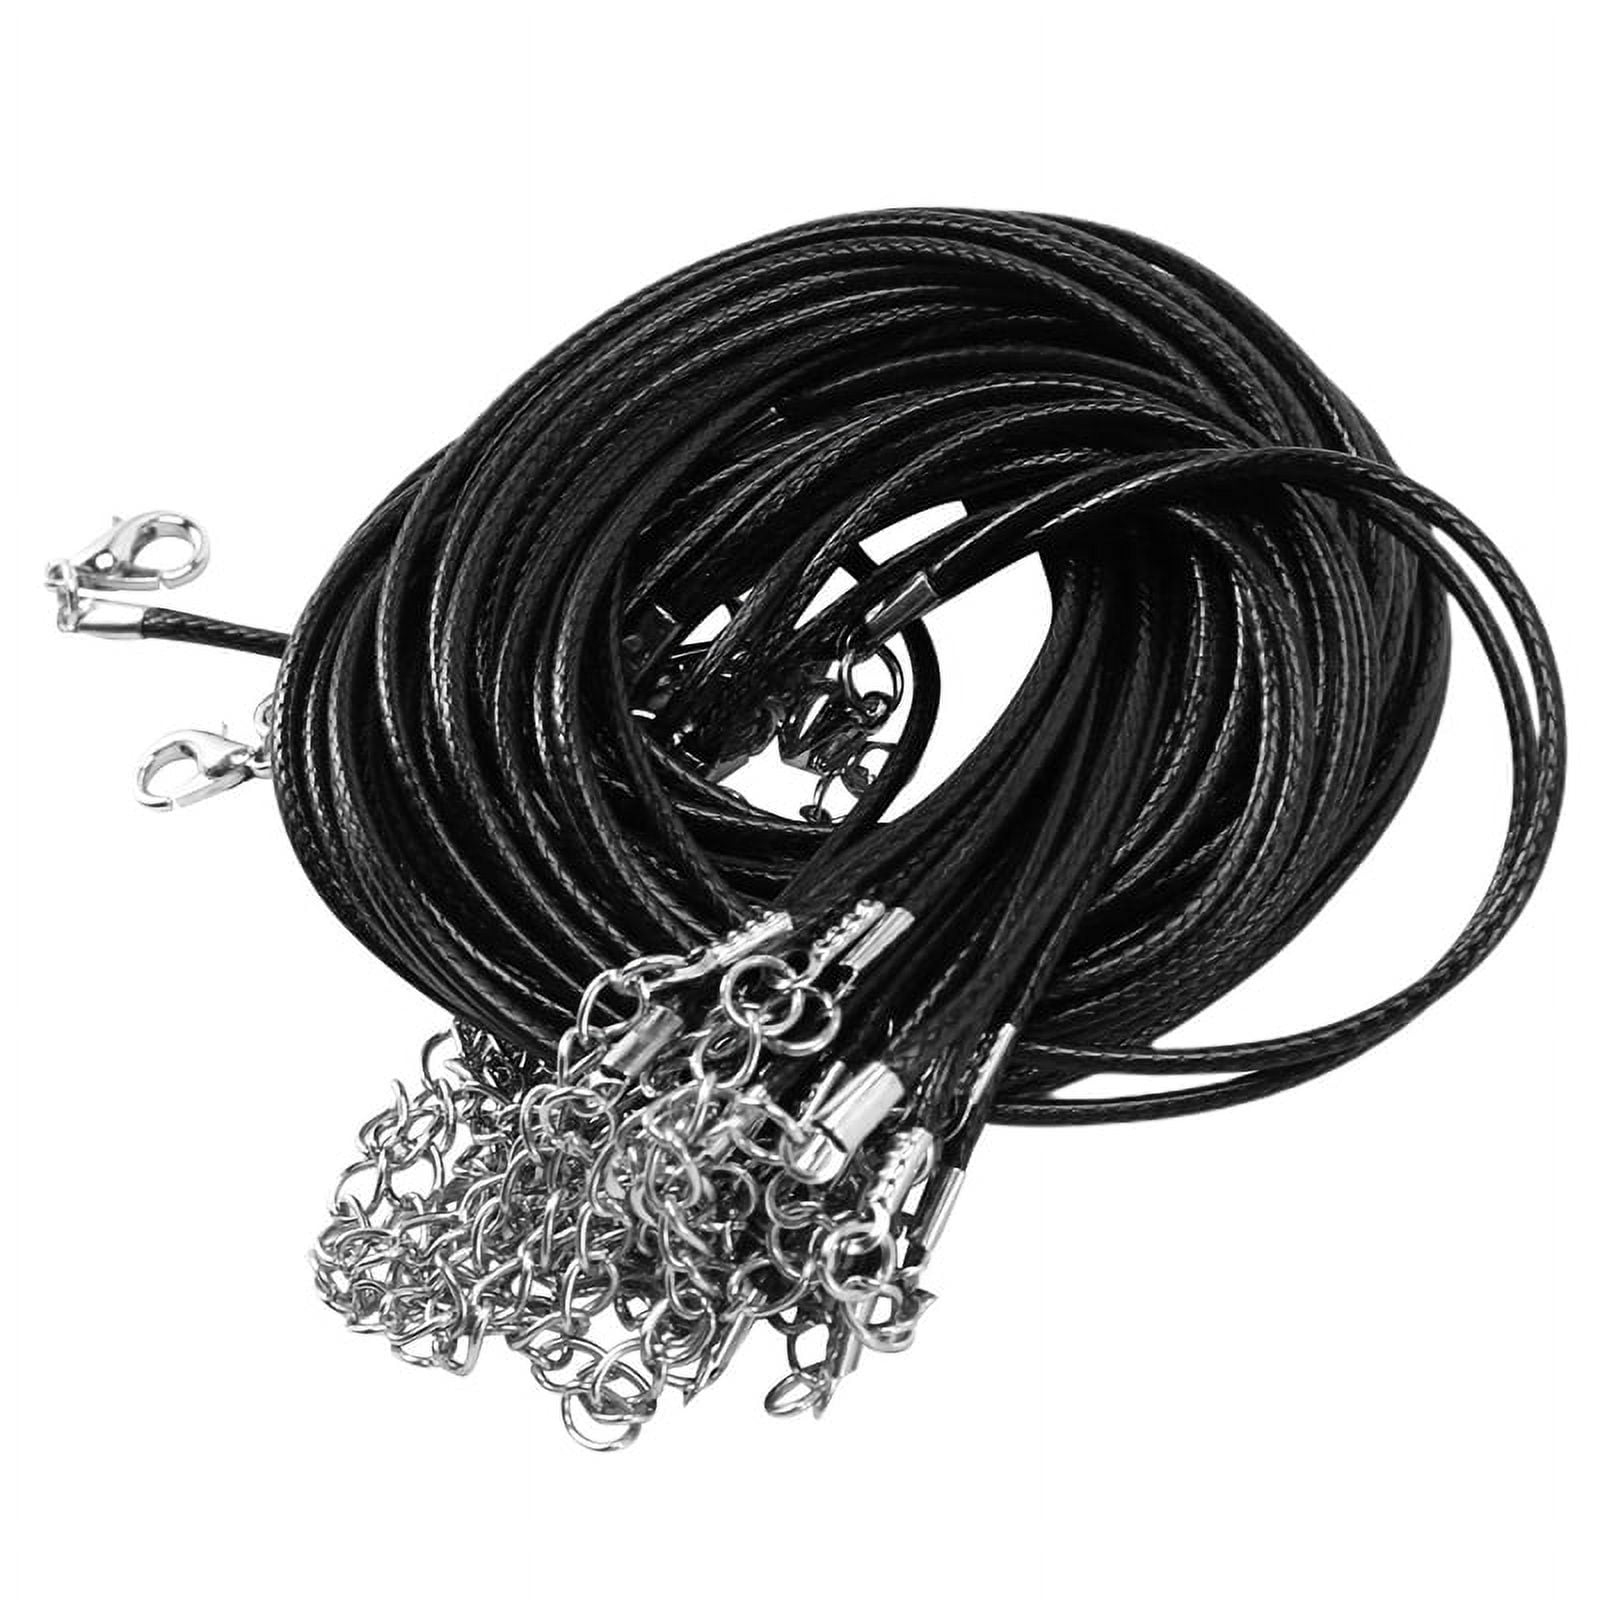 20 Pieces 20 Inches Black Waxed Necklace Cord with Clasp Bulk for Bracelet Necklace and Jewelry Making, Women's, Size: 1